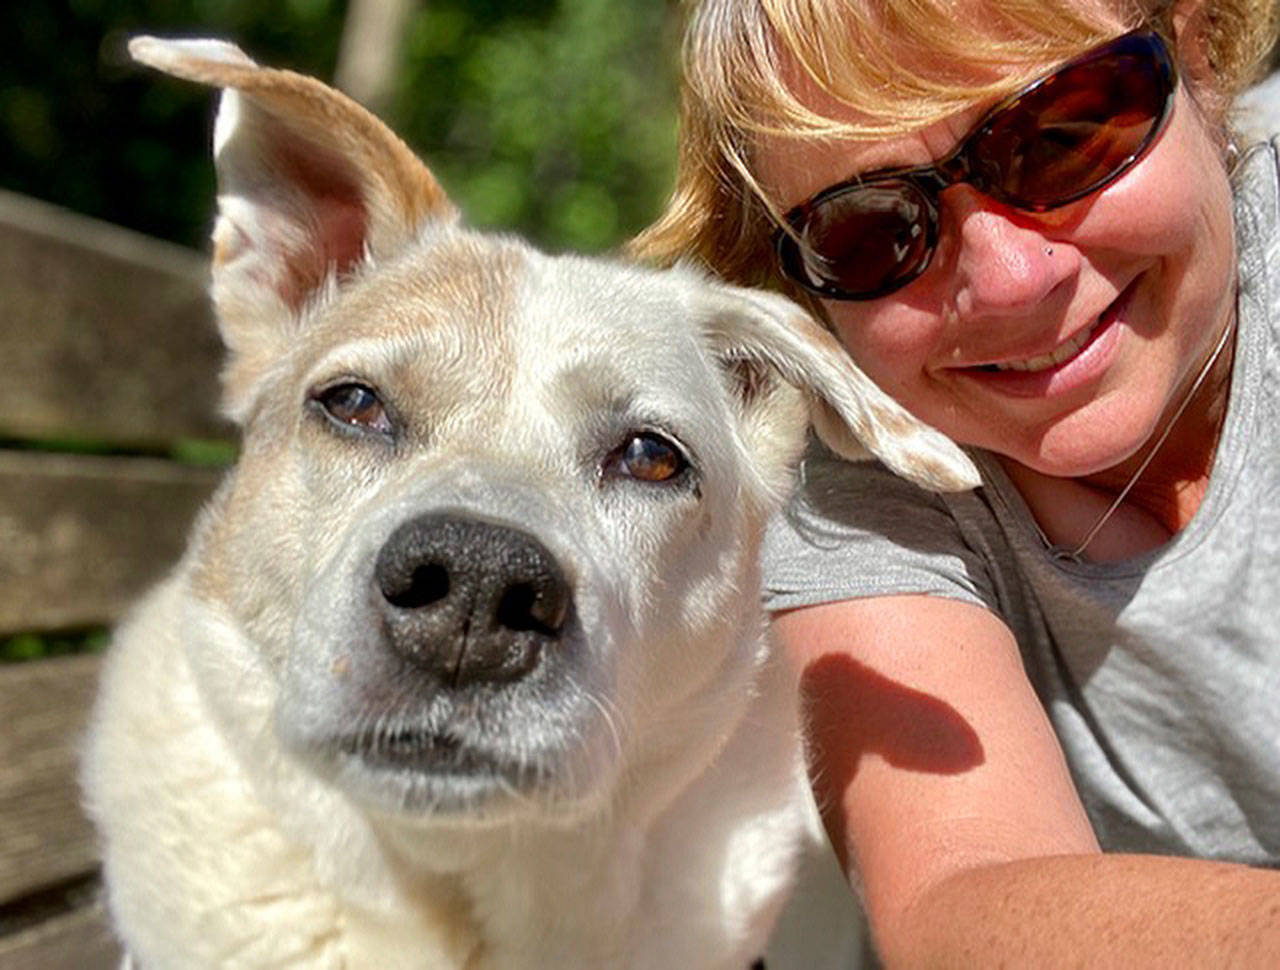 Lee Harper, Kitsap Humane Society’s new executive director, enjoys the outdoors with her dog Columbo, a 7-year-old yellow lab. (Contributed image)